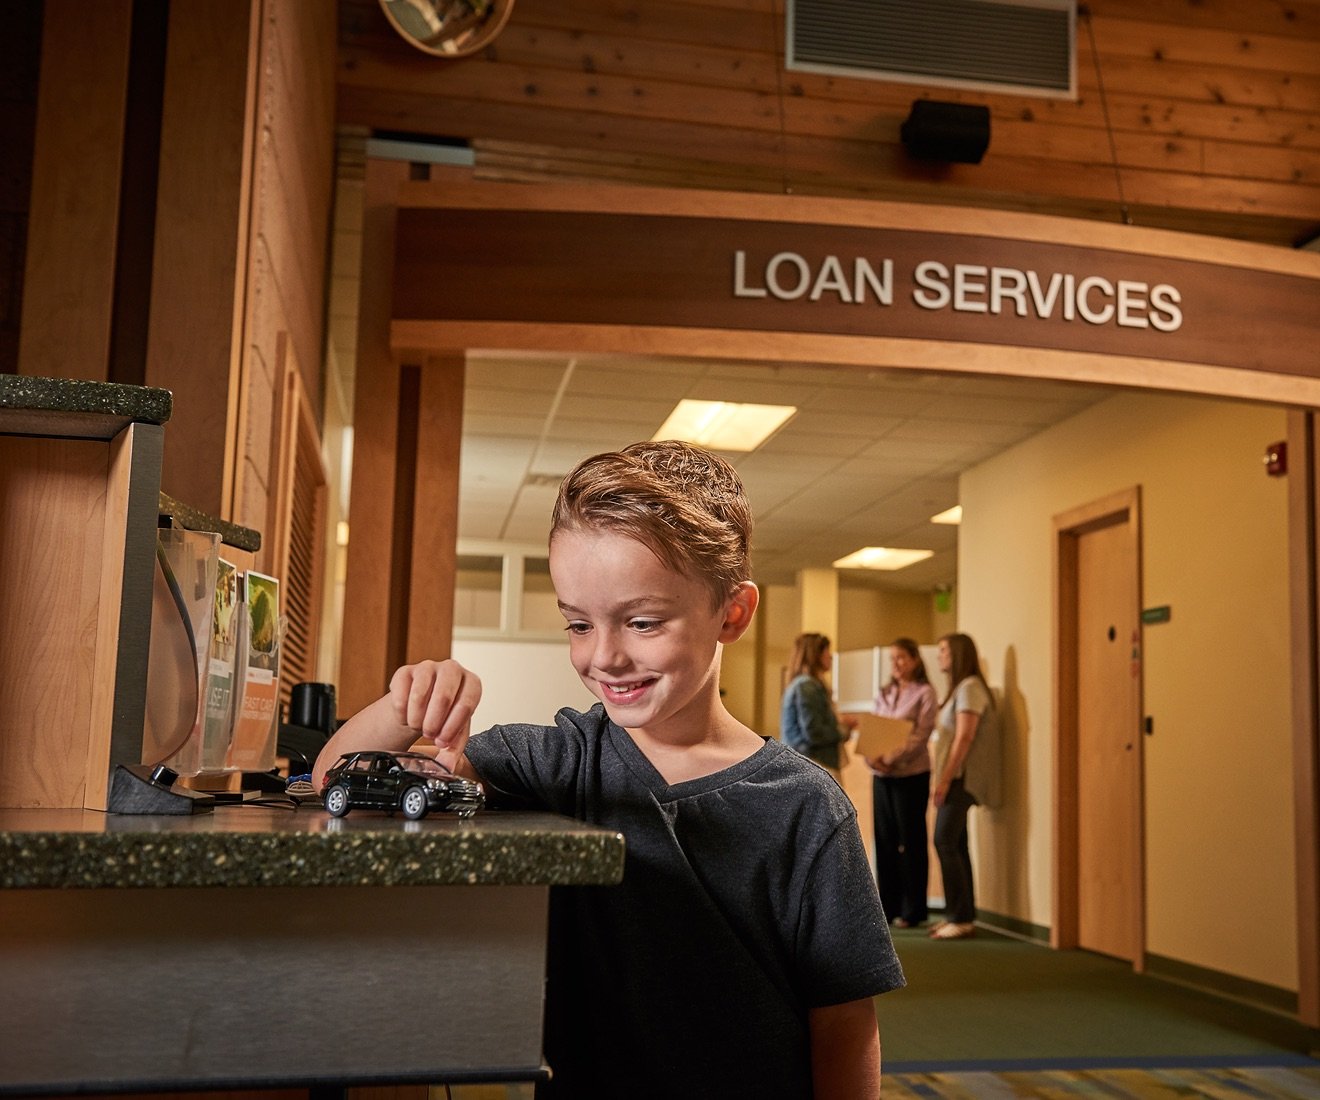 Child playing at a bank counter.